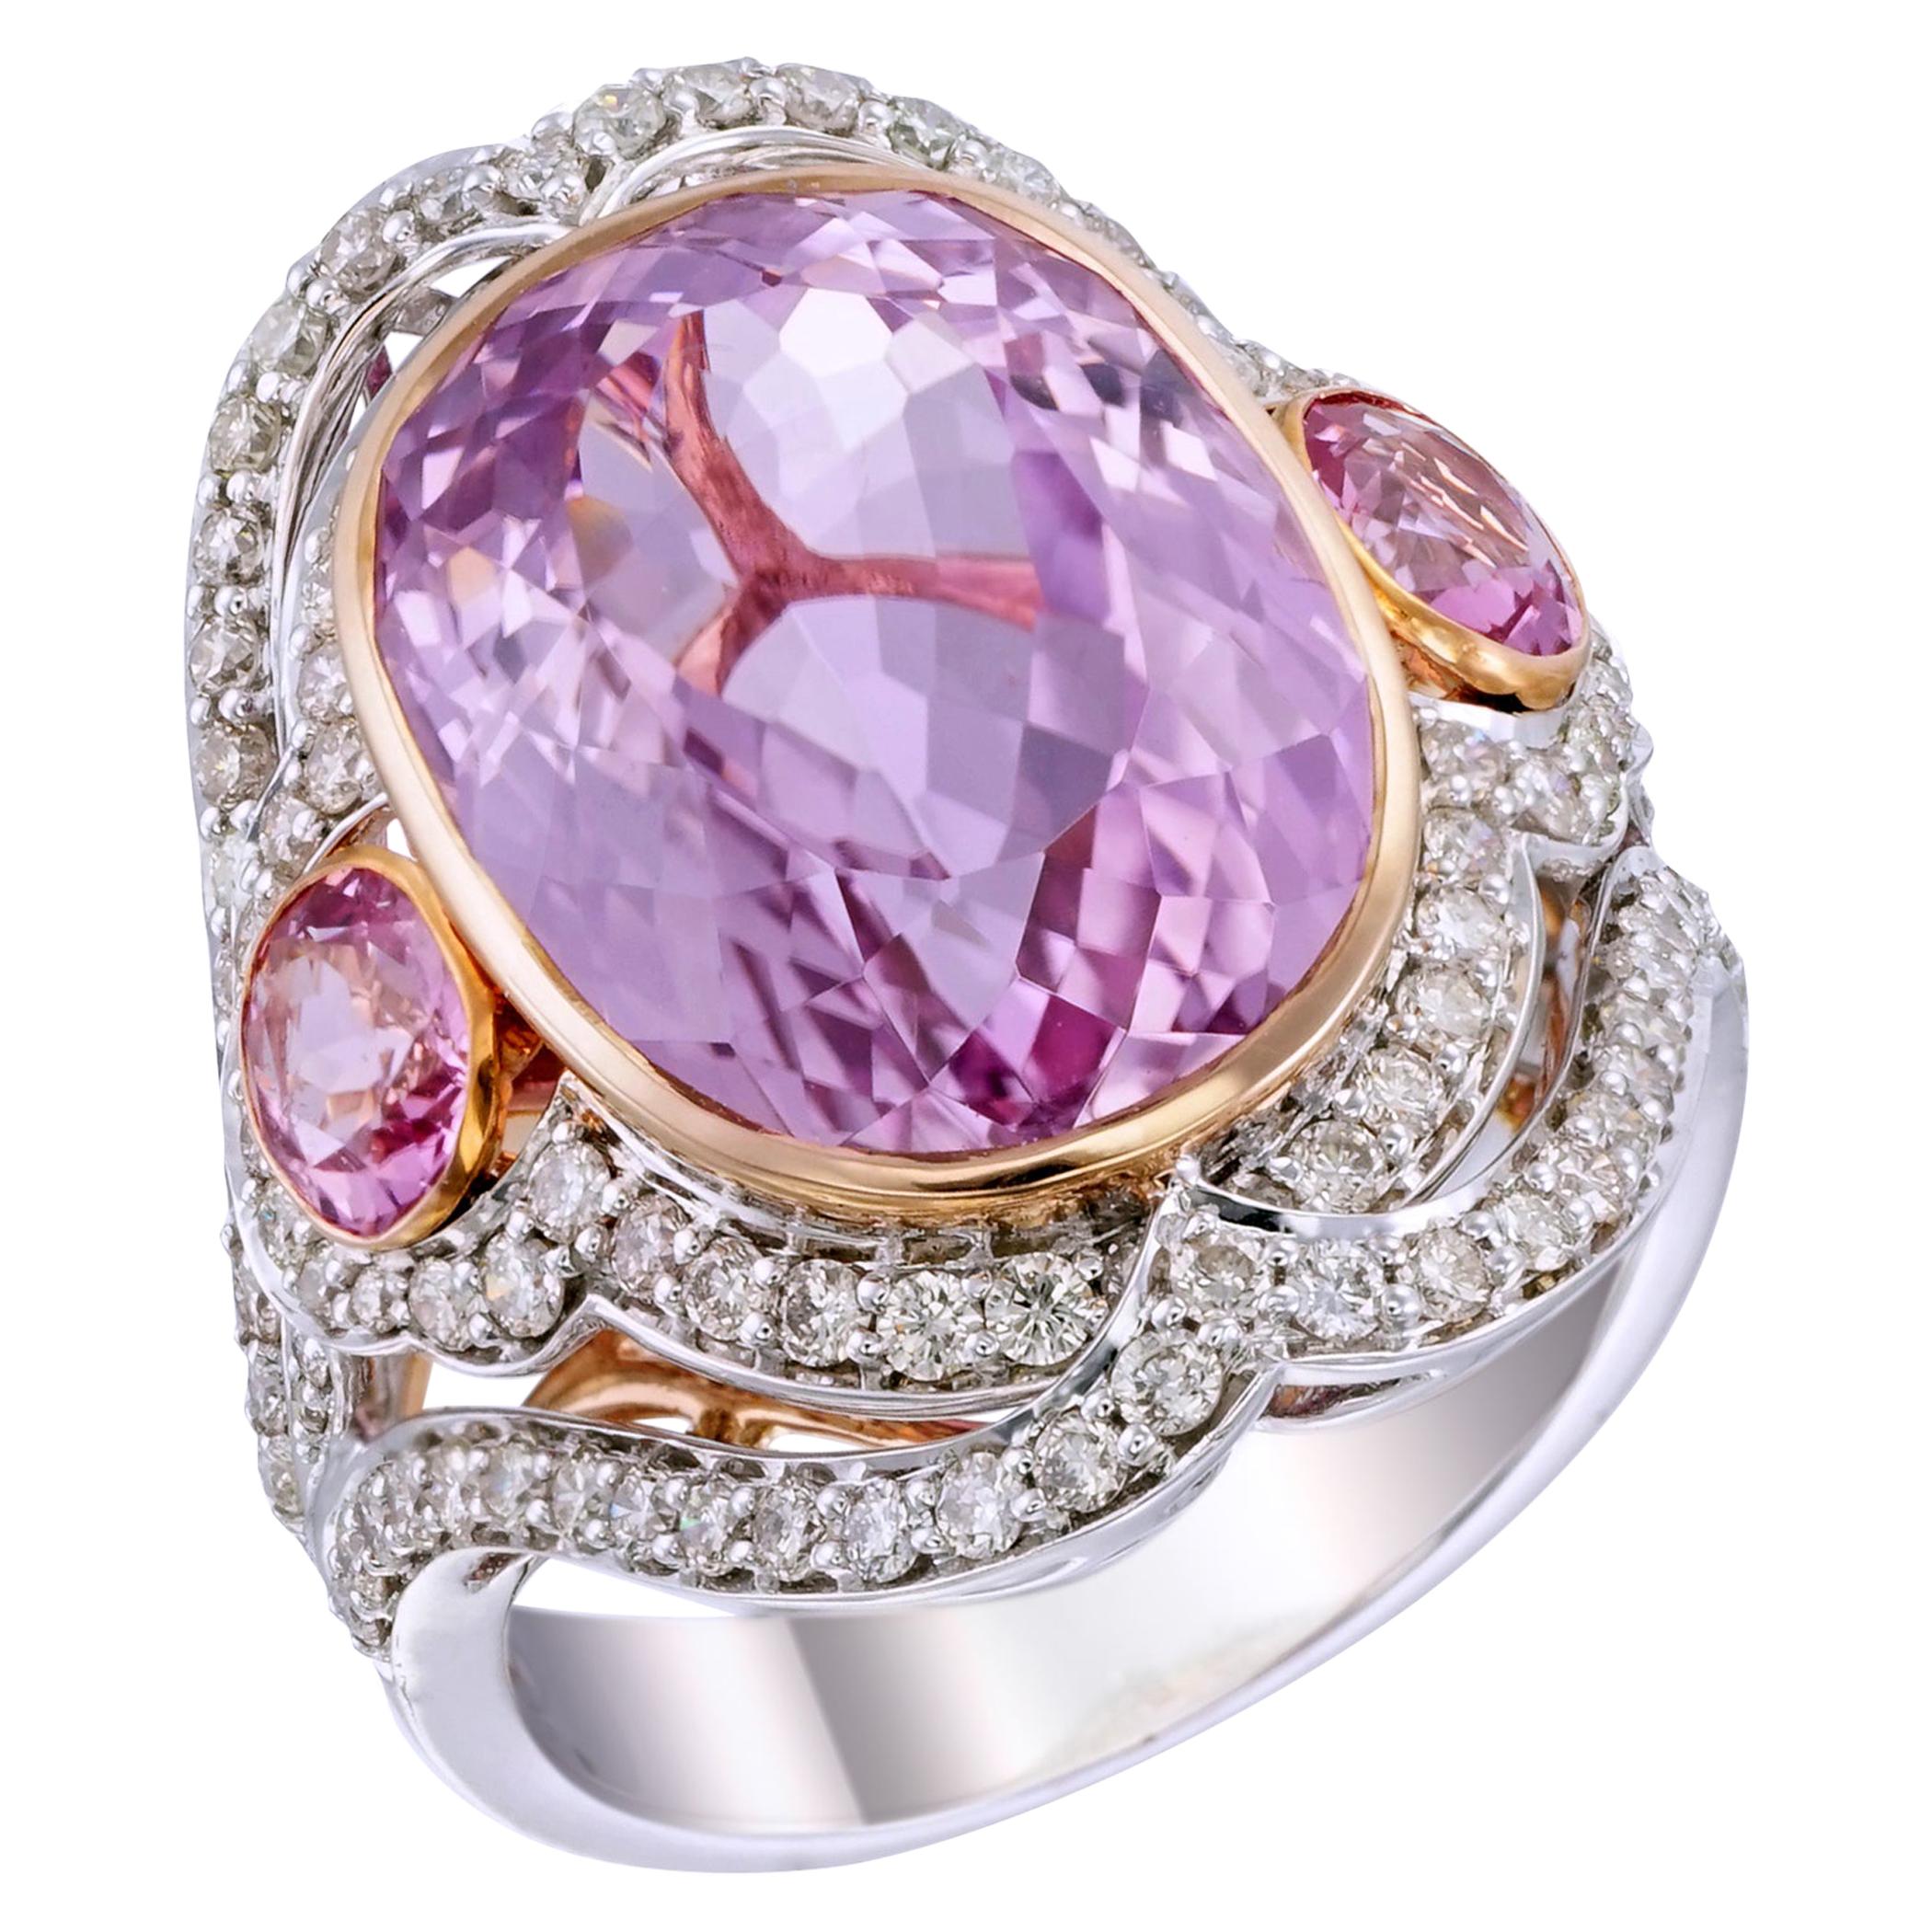 Zorab Creation 14 Carat Pretty in Pink Kunzite Ring For Sale